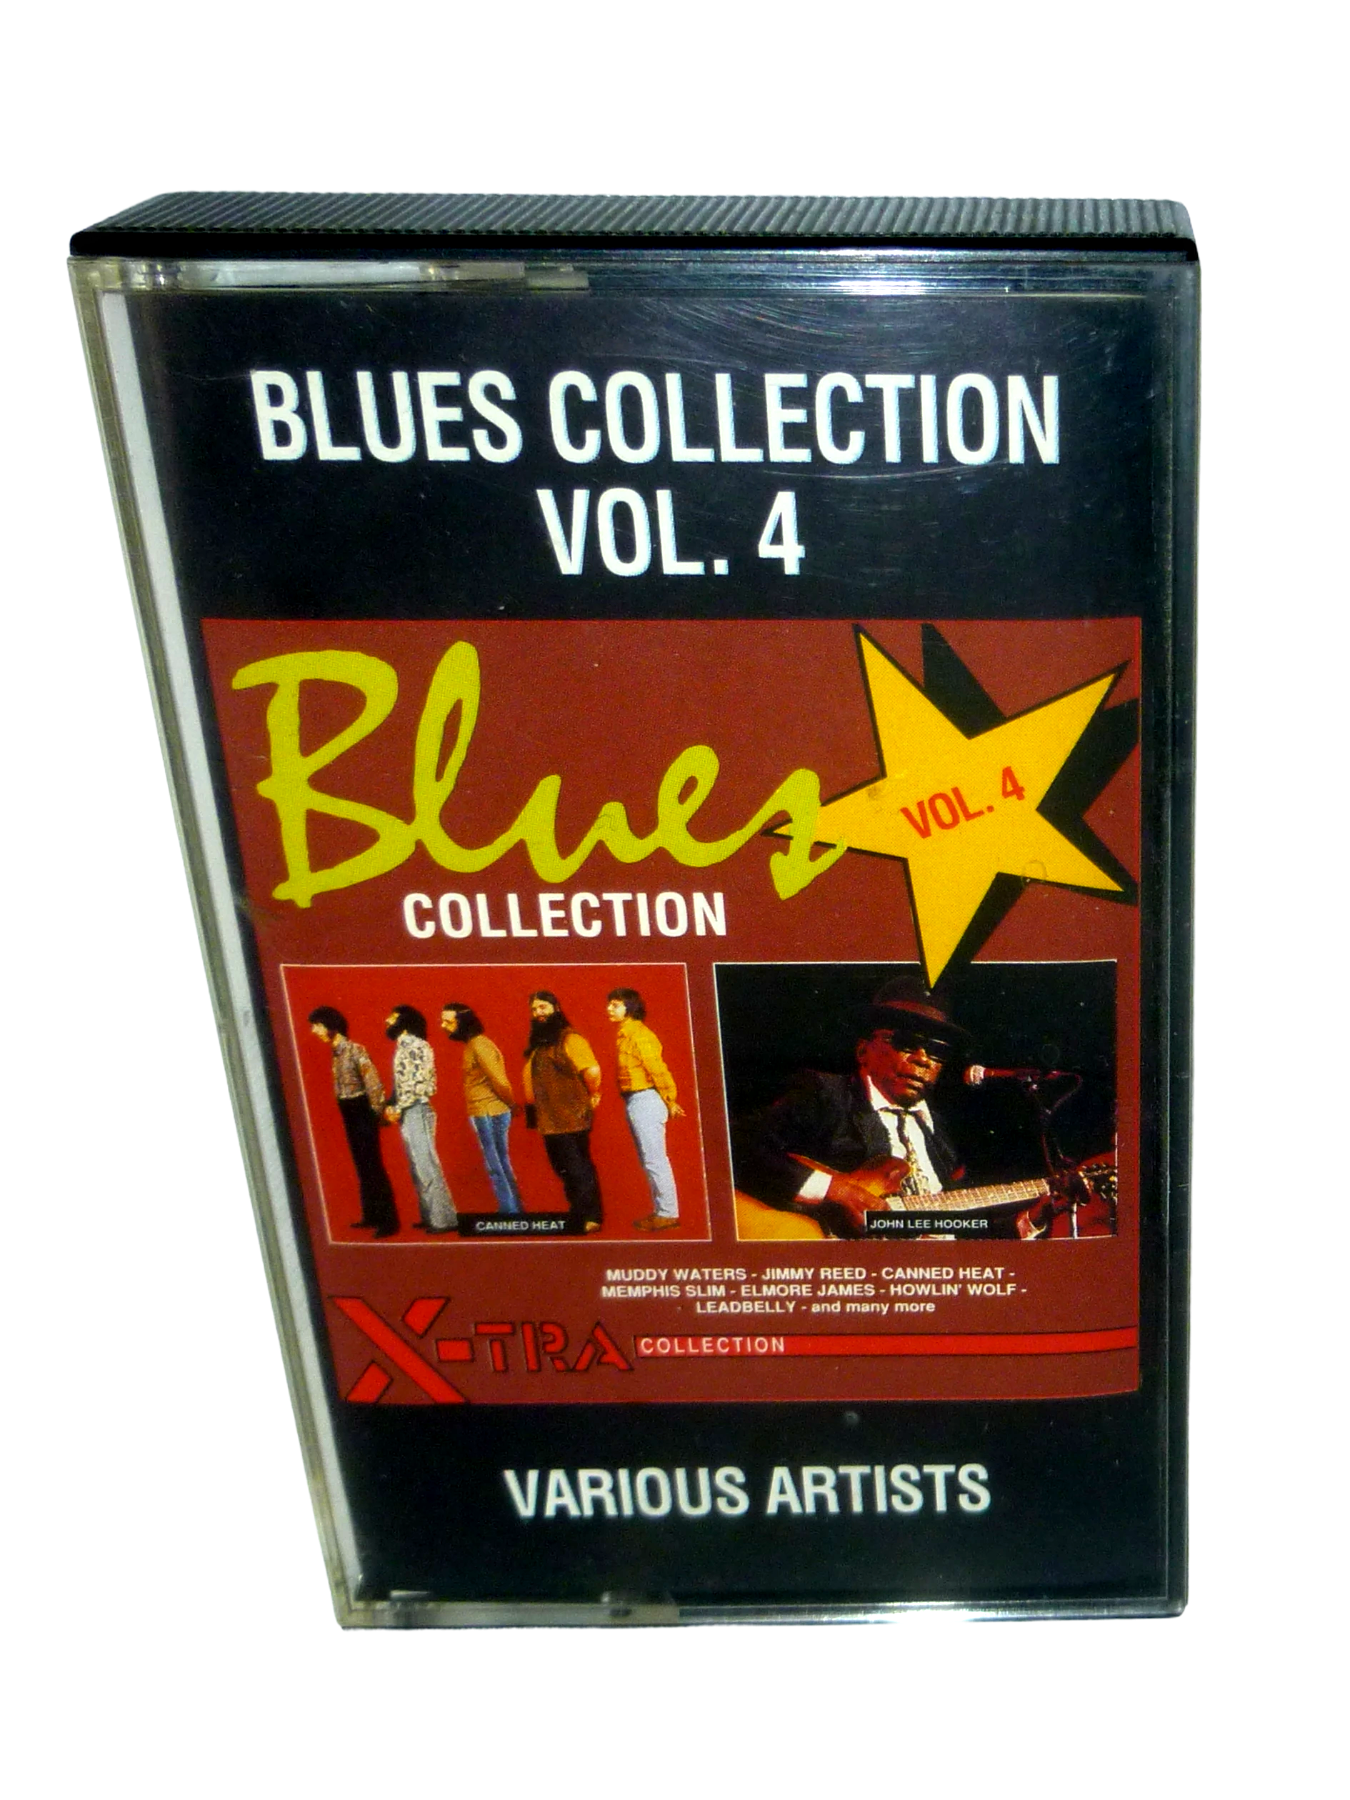 Blues Collection Vol. 4 - X-Tra Collection - Audio Kassette